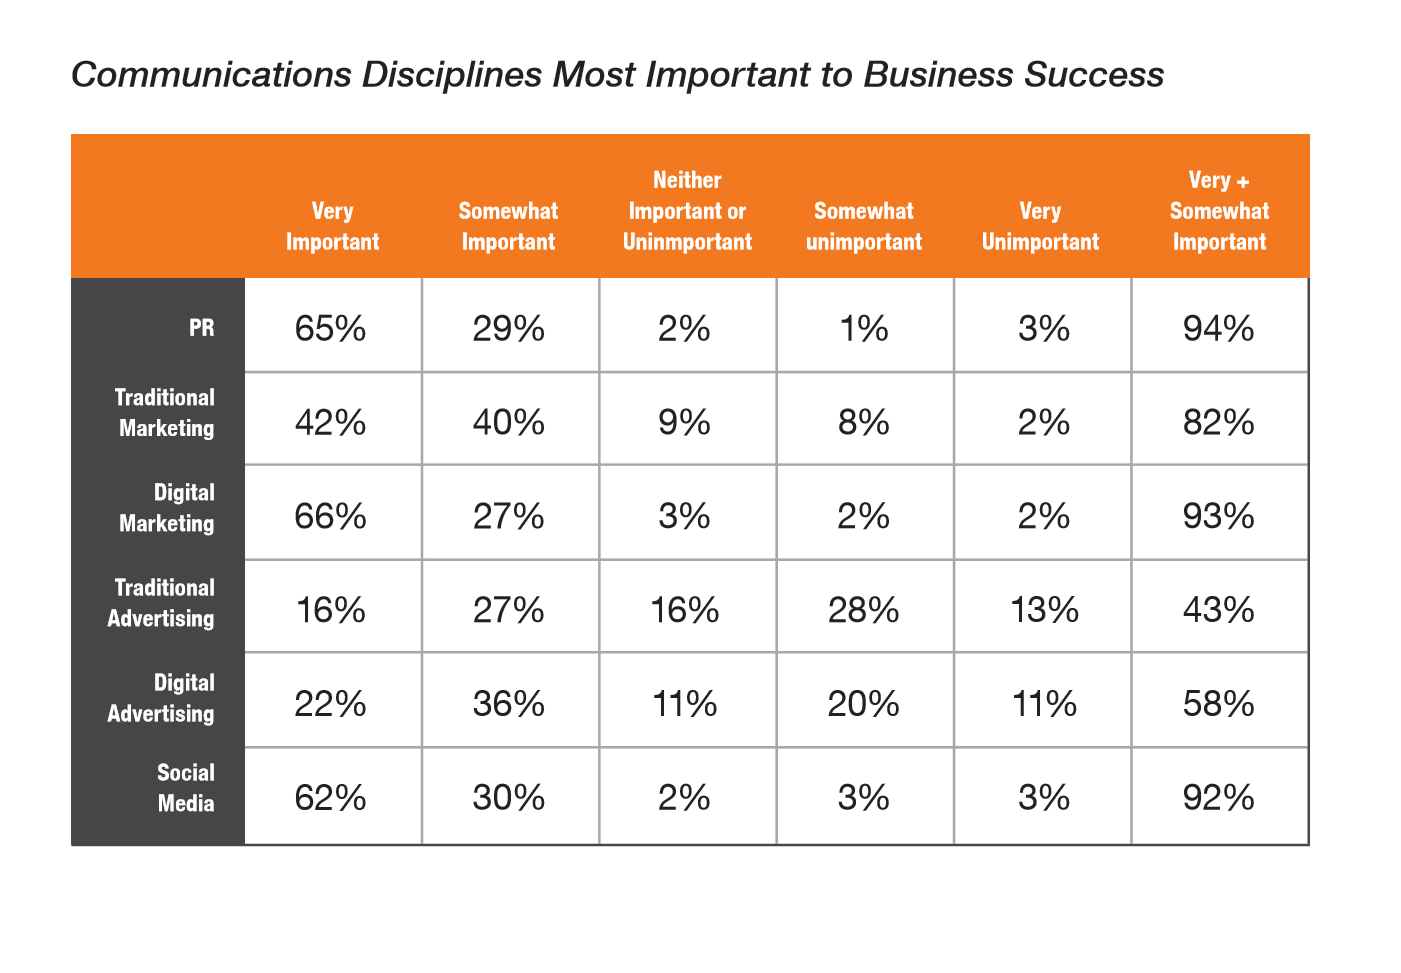 Communications Disciplines Most Important To Business Success